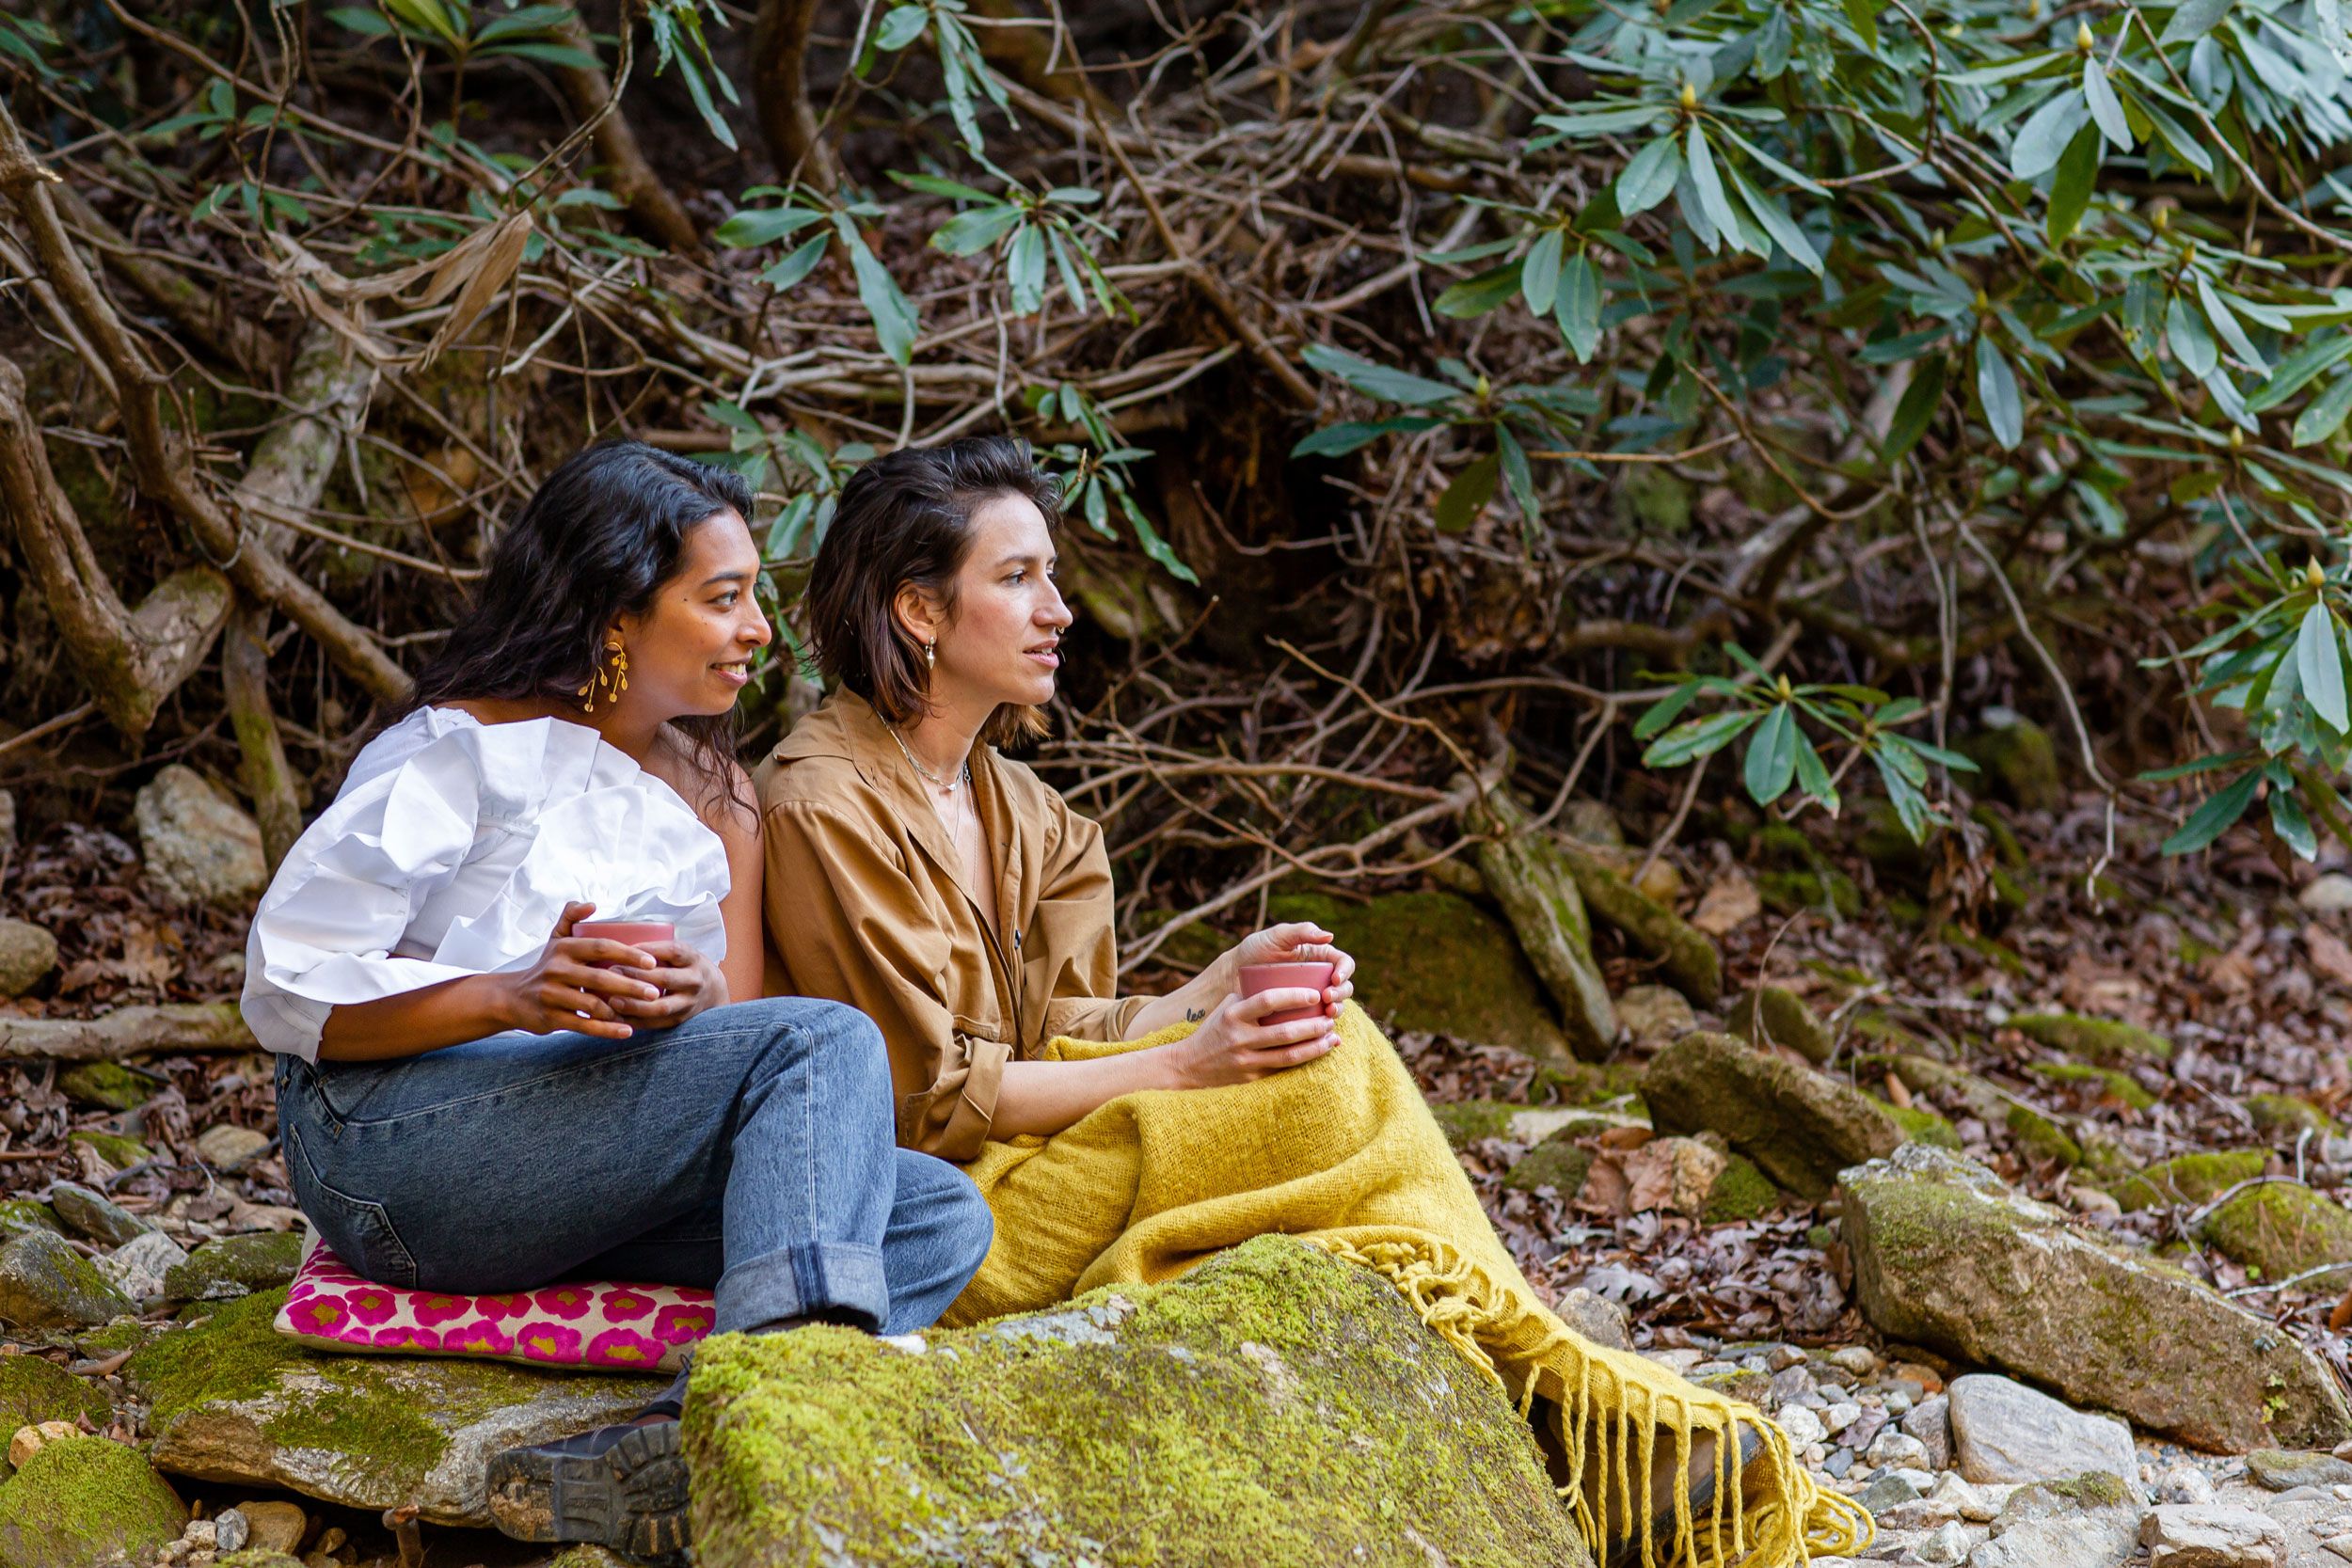 Sana Jeveri Kadri and Connie Matisse, two fierce female CEOs, sip chai and stay warm under blankets along the Hungry River, a short walk through the wood's from Connie's house in Flat Rock.